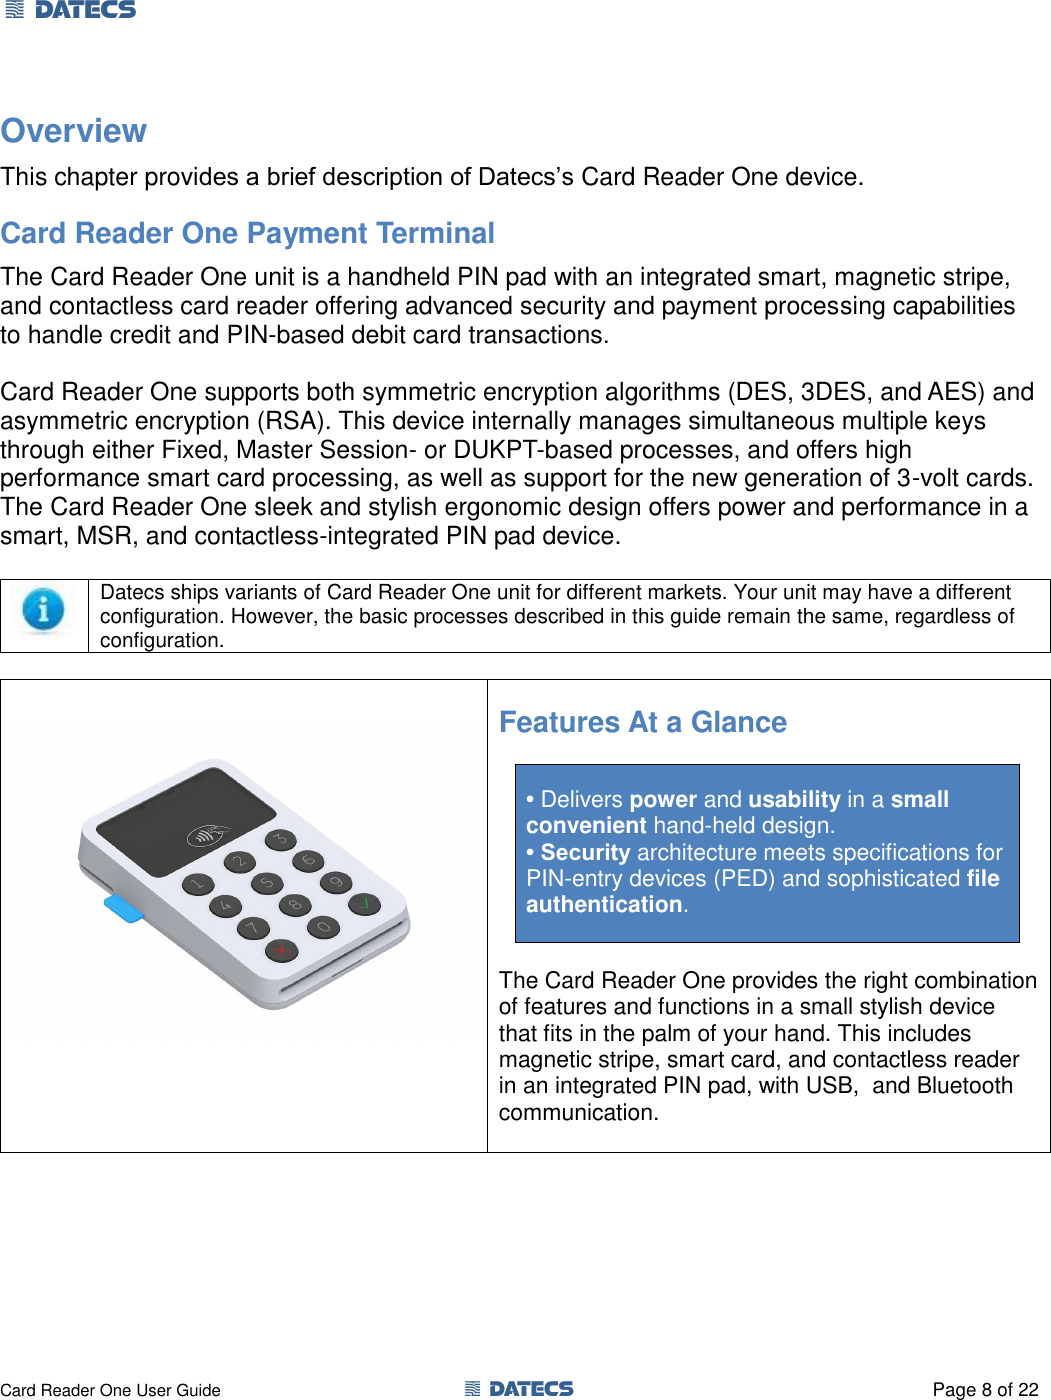 1 DATECS       Card Reader One User Guide  1 DATECS  Page 8 of 22 Overview This chapter provides a brief description of Datecs’s Card Reader One device. Card Reader One Payment Terminal The Card Reader One unit is a handheld PIN pad with an integrated smart, magnetic stripe, and contactless card reader offering advanced security and payment processing capabilities to handle credit and PIN-based debit card transactions.  Card Reader One supports both symmetric encryption algorithms (DES, 3DES, and AES) and asymmetric encryption (RSA). This device internally manages simultaneous multiple keys through either Fixed, Master Session- or DUKPT-based processes, and offers high performance smart card processing, as well as support for the new generation of 3-volt cards. The Card Reader One sleek and stylish ergonomic design offers power and performance in a smart, MSR, and contactless-integrated PIN pad device.   Datecs ships variants of Card Reader One unit for different markets. Your unit may have a different configuration. However, the basic processes described in this guide remain the same, regardless of configuration.   Features At a Glance  • Delivers power and usability in a small  convenient hand-held design. • Security architecture meets specifications for PIN-entry devices (PED) and sophisticated file authentication.   The Card Reader One provides the right combination of features and functions in a small stylish device that fits in the palm of your hand. This includes magnetic stripe, smart card, and contactless reader in an integrated PIN pad, with USB,  and Bluetooth communication.   